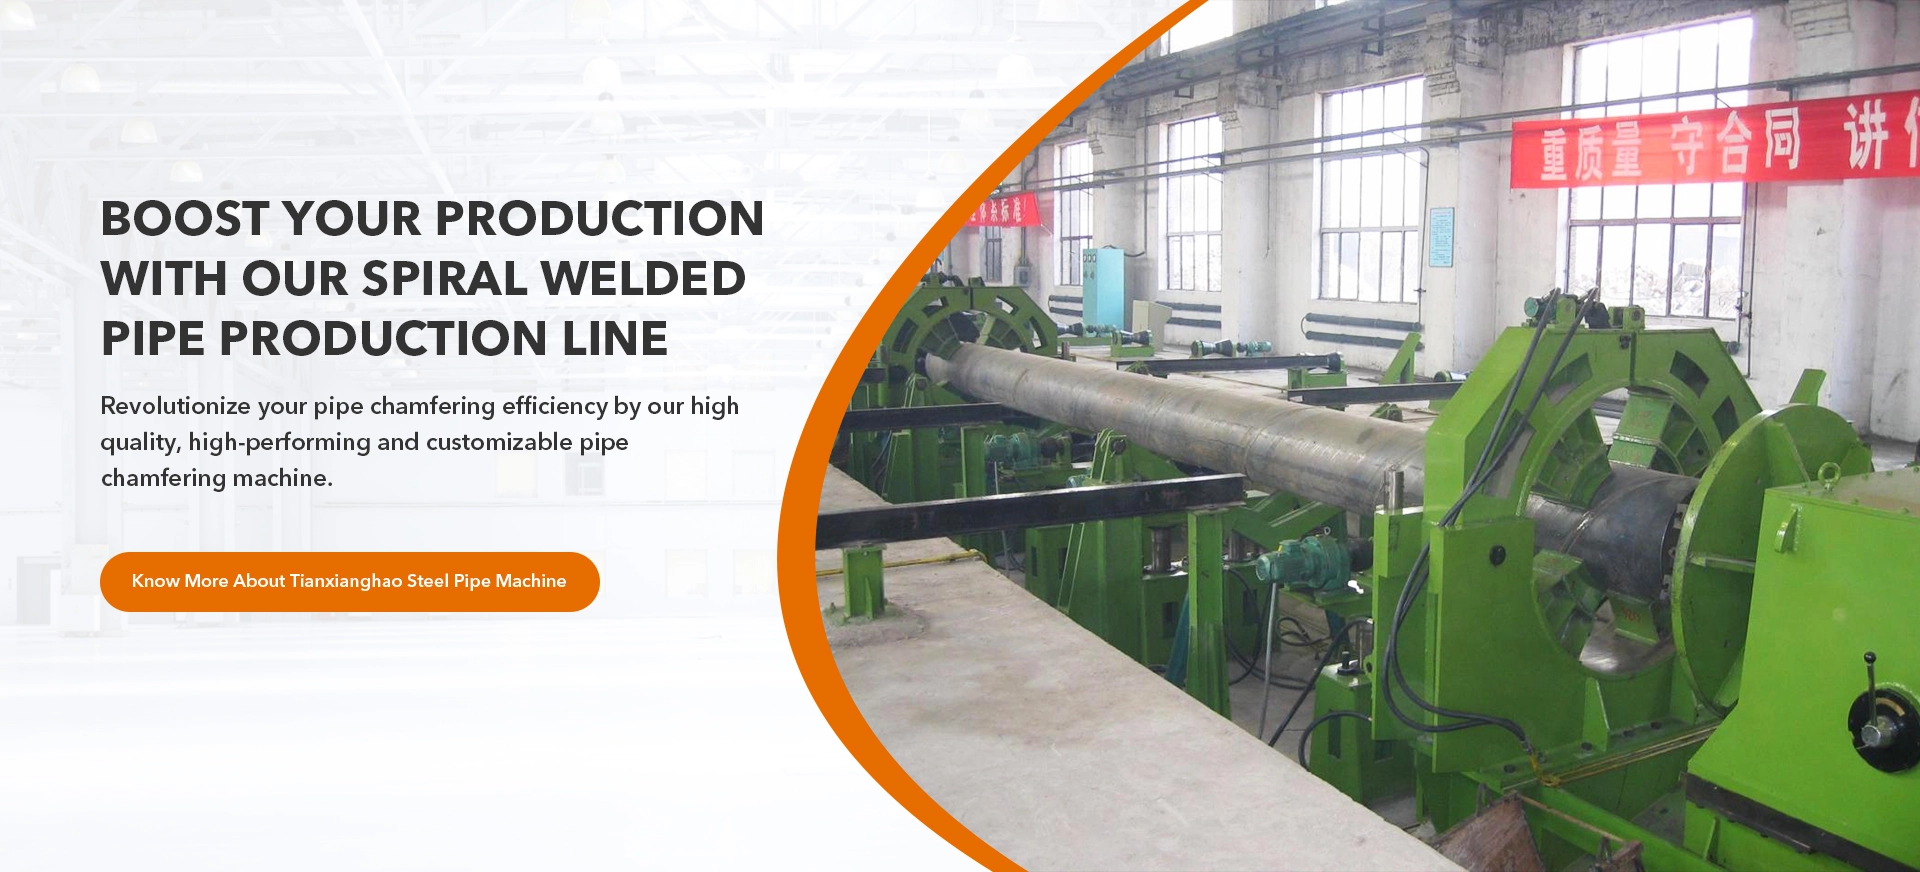 Boost Your Production with Our Spiral Welded Pipe Production Line